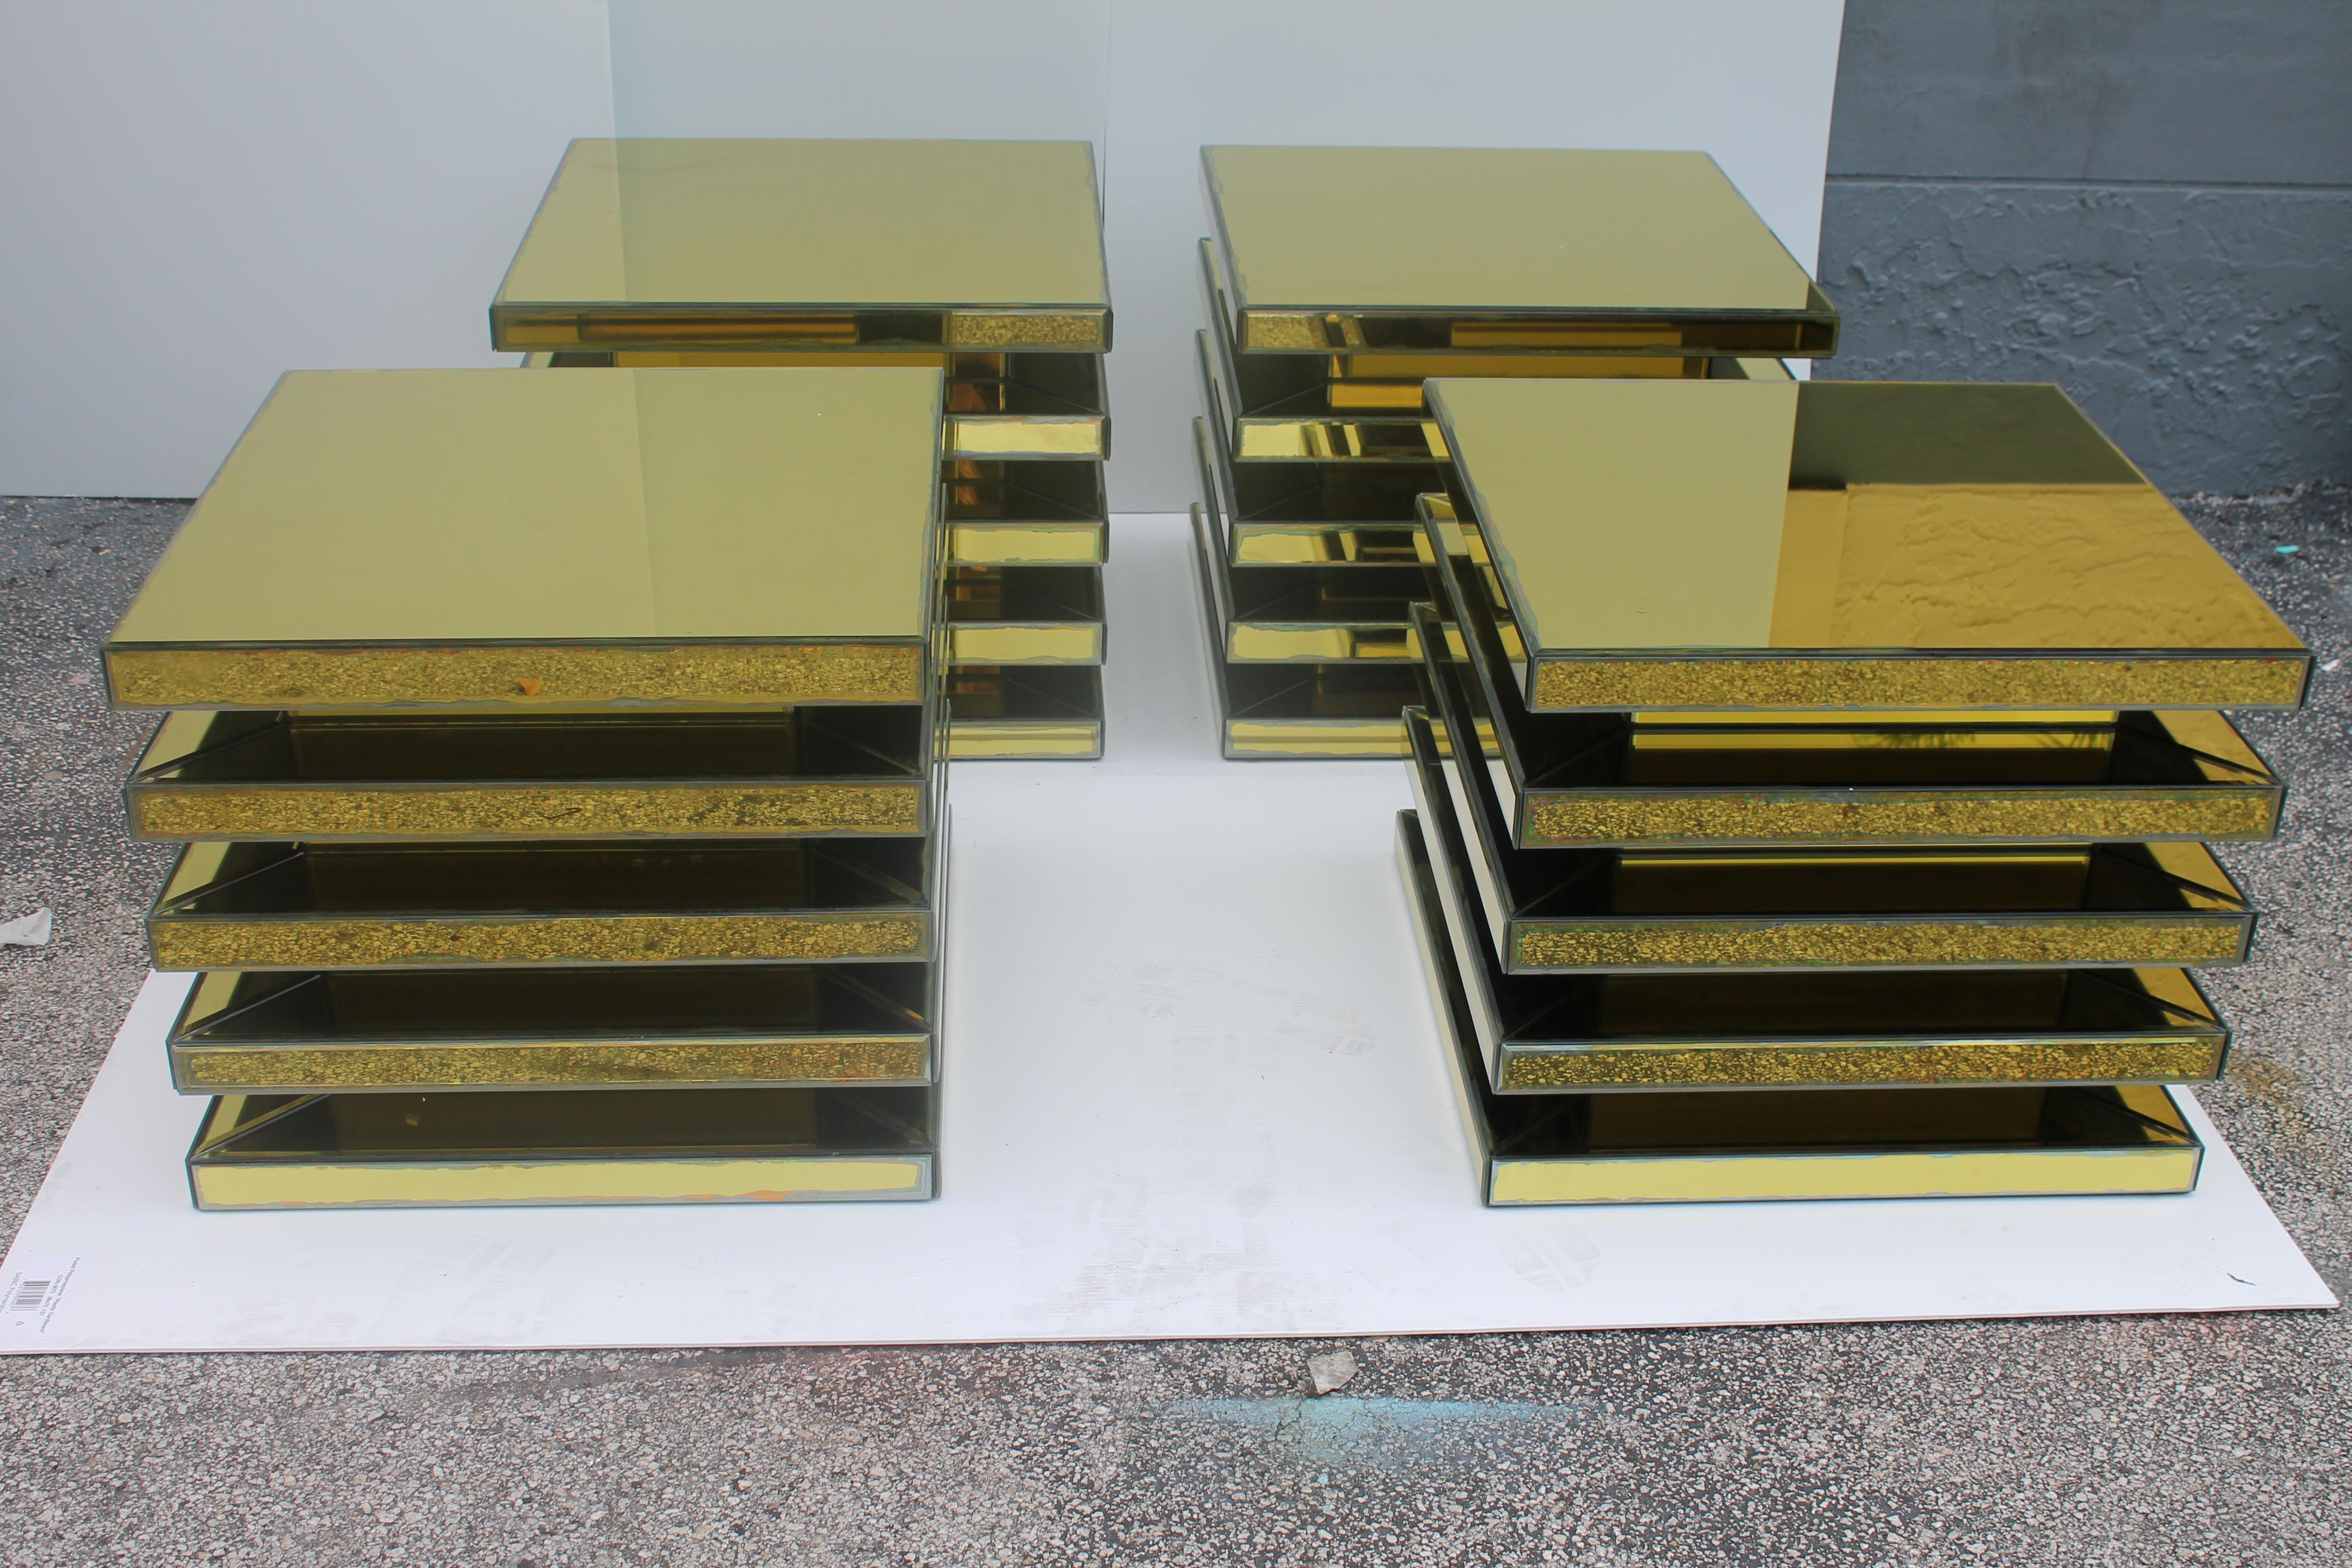 1950's Set of 4 Mid Century Modern Antiqued Gold Mirrored End Tables/ Accent Tables. Matched tables with 5 tiers each. We purchased these tables at a Miami Beach Estate.